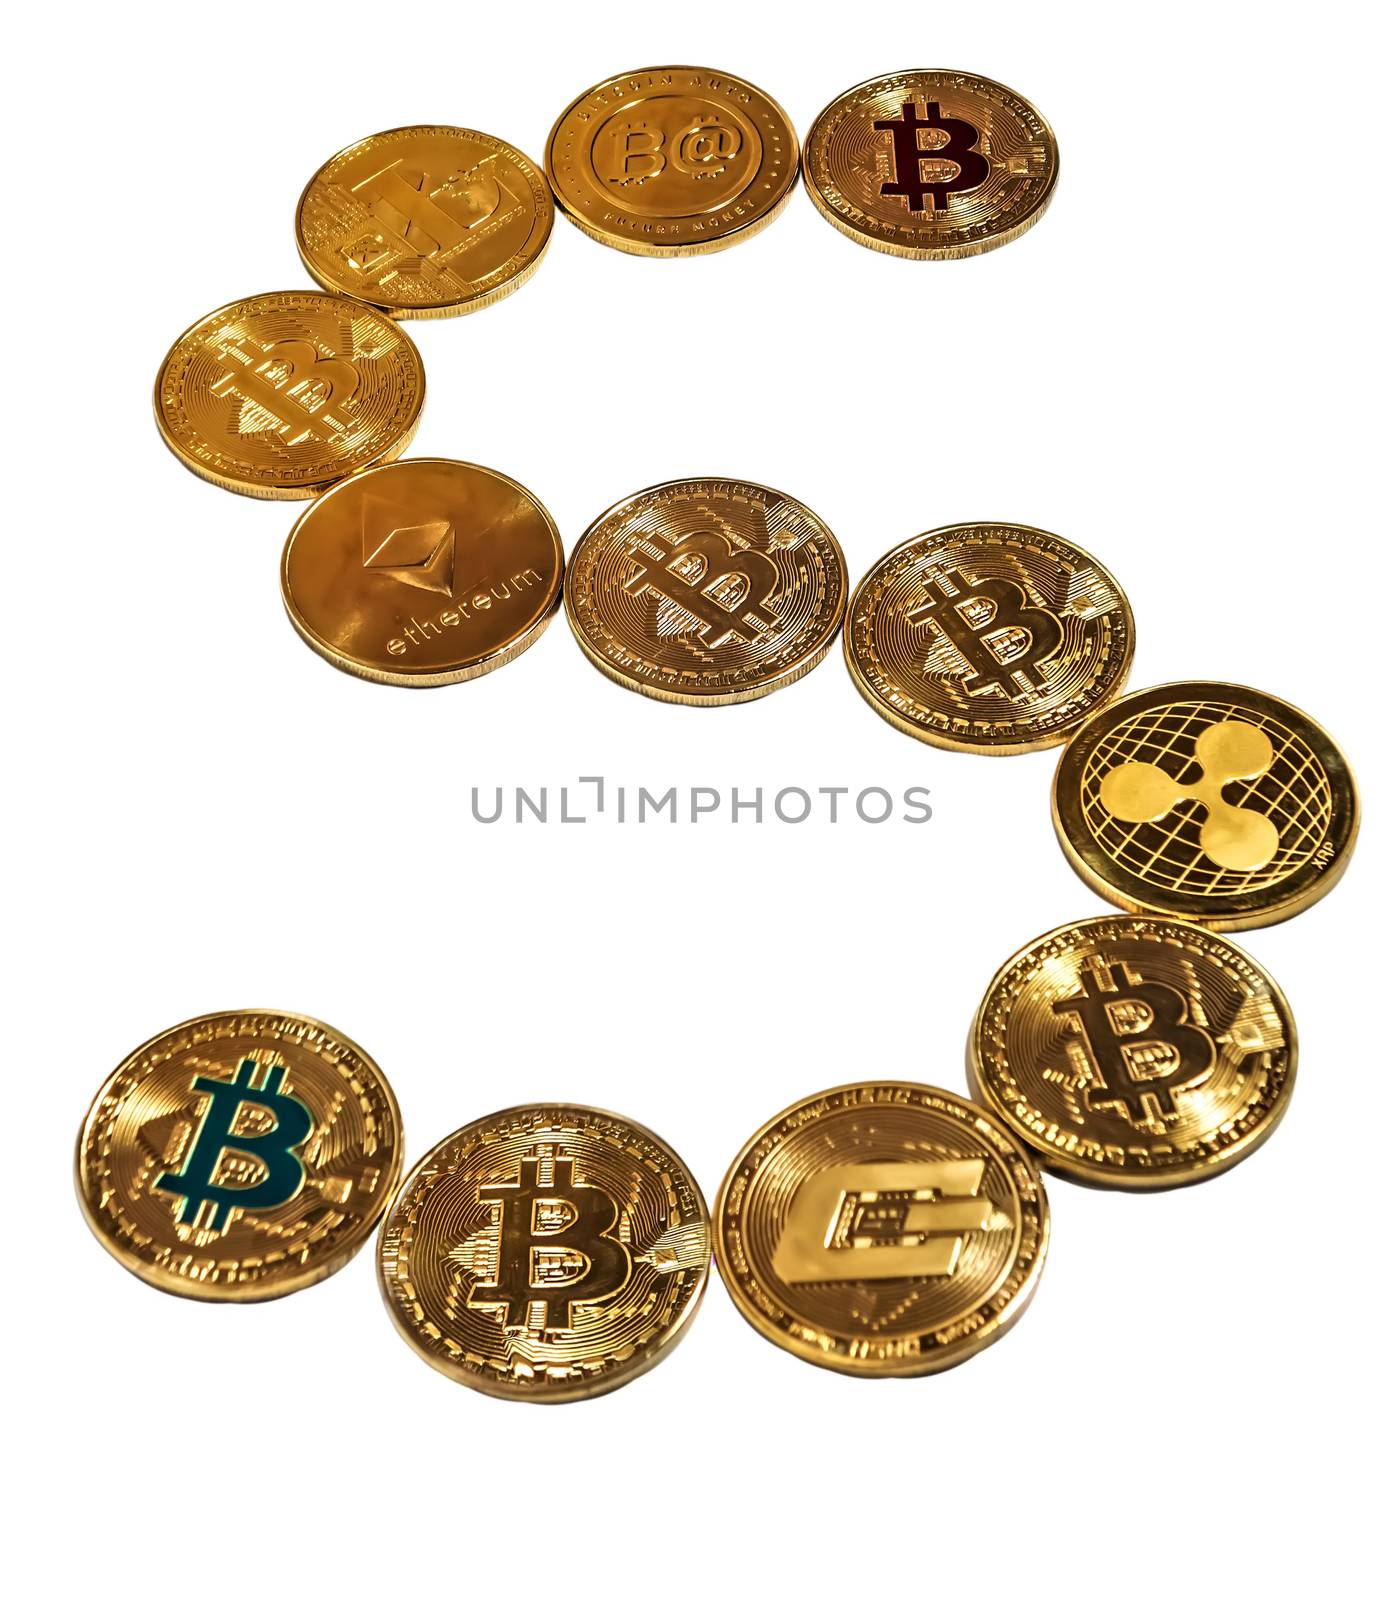 Bitcoin BTC, Ripple XRP, Ethereum ETH, Dash, Litecoin LTC crypto currency blockchain Coin isolated on white background soft focus